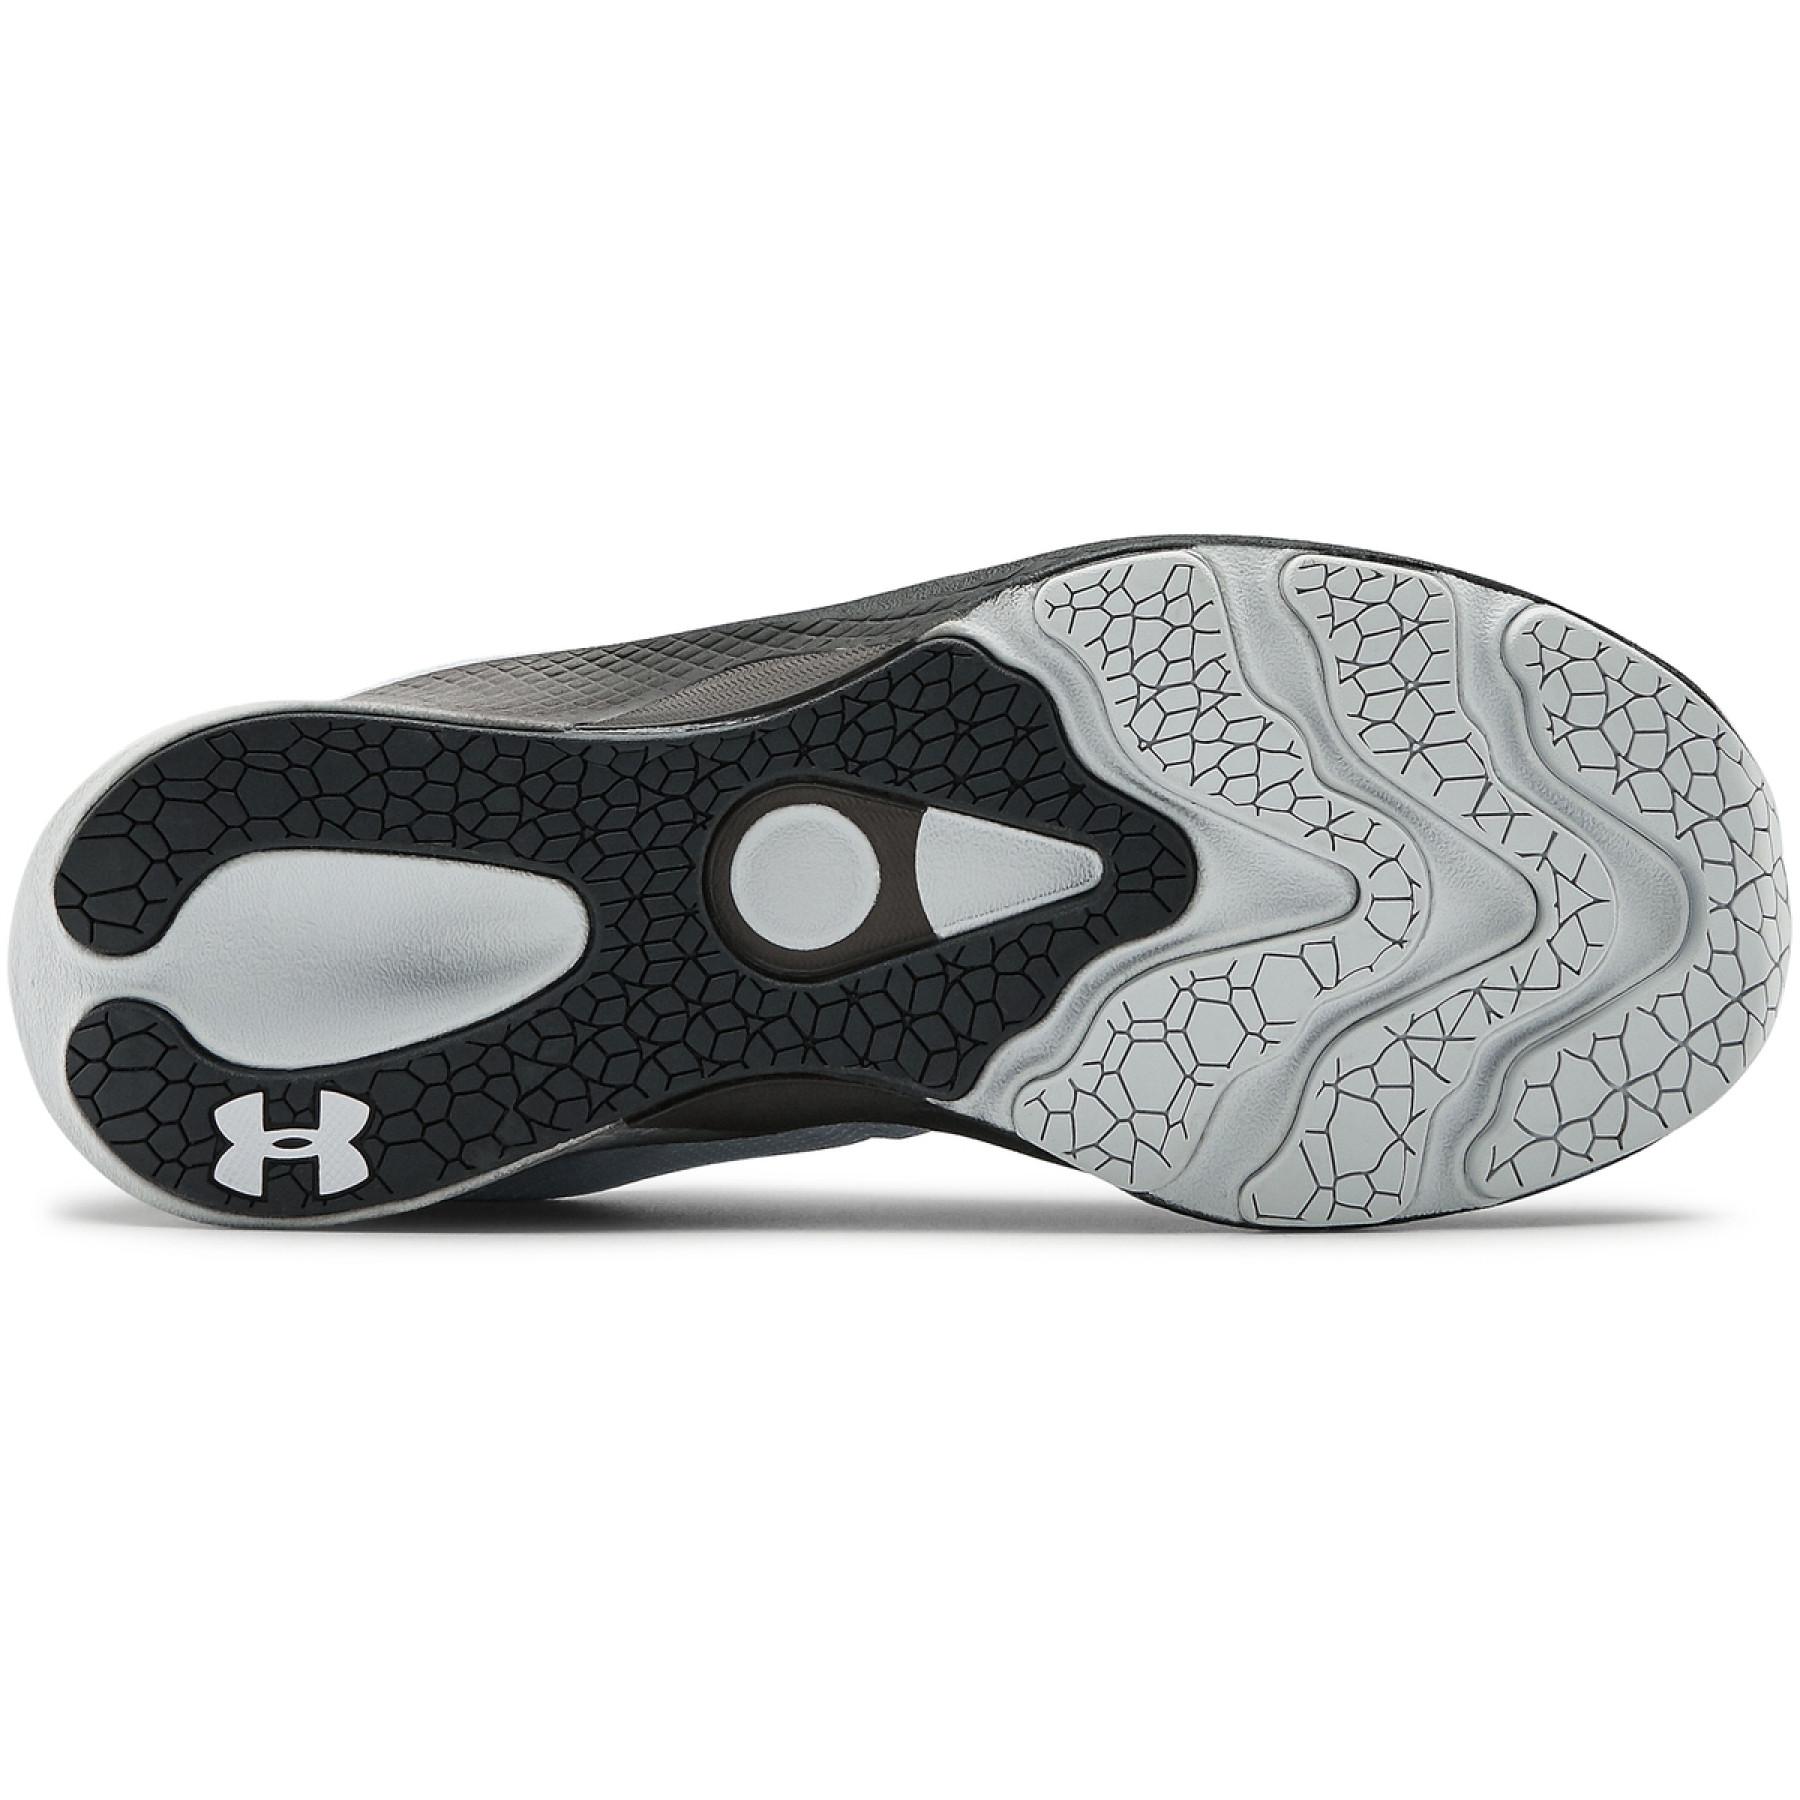 Zapatillas de running para mujer Under Armour Charged Pulse